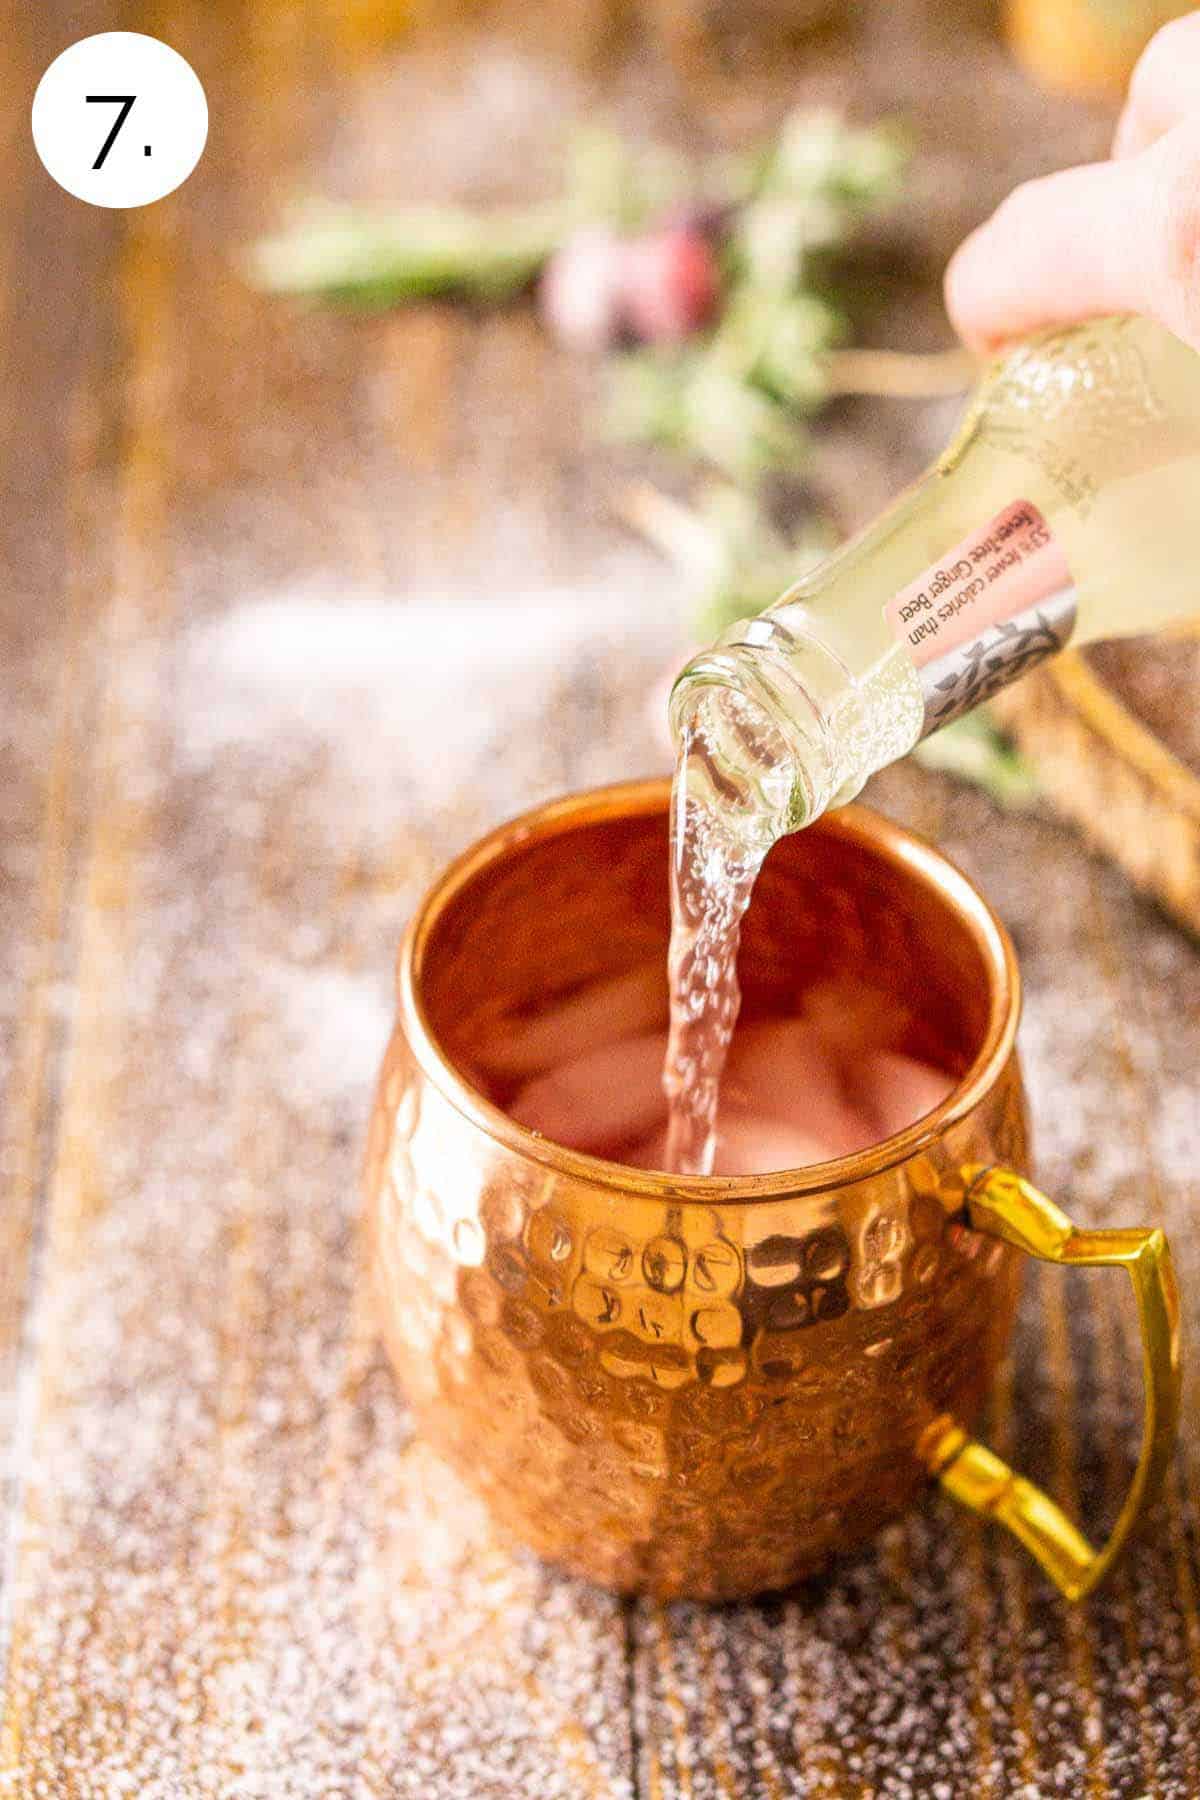 A hand pouring a bottle of ginger beer into the copper mug on a brown wooden surface.